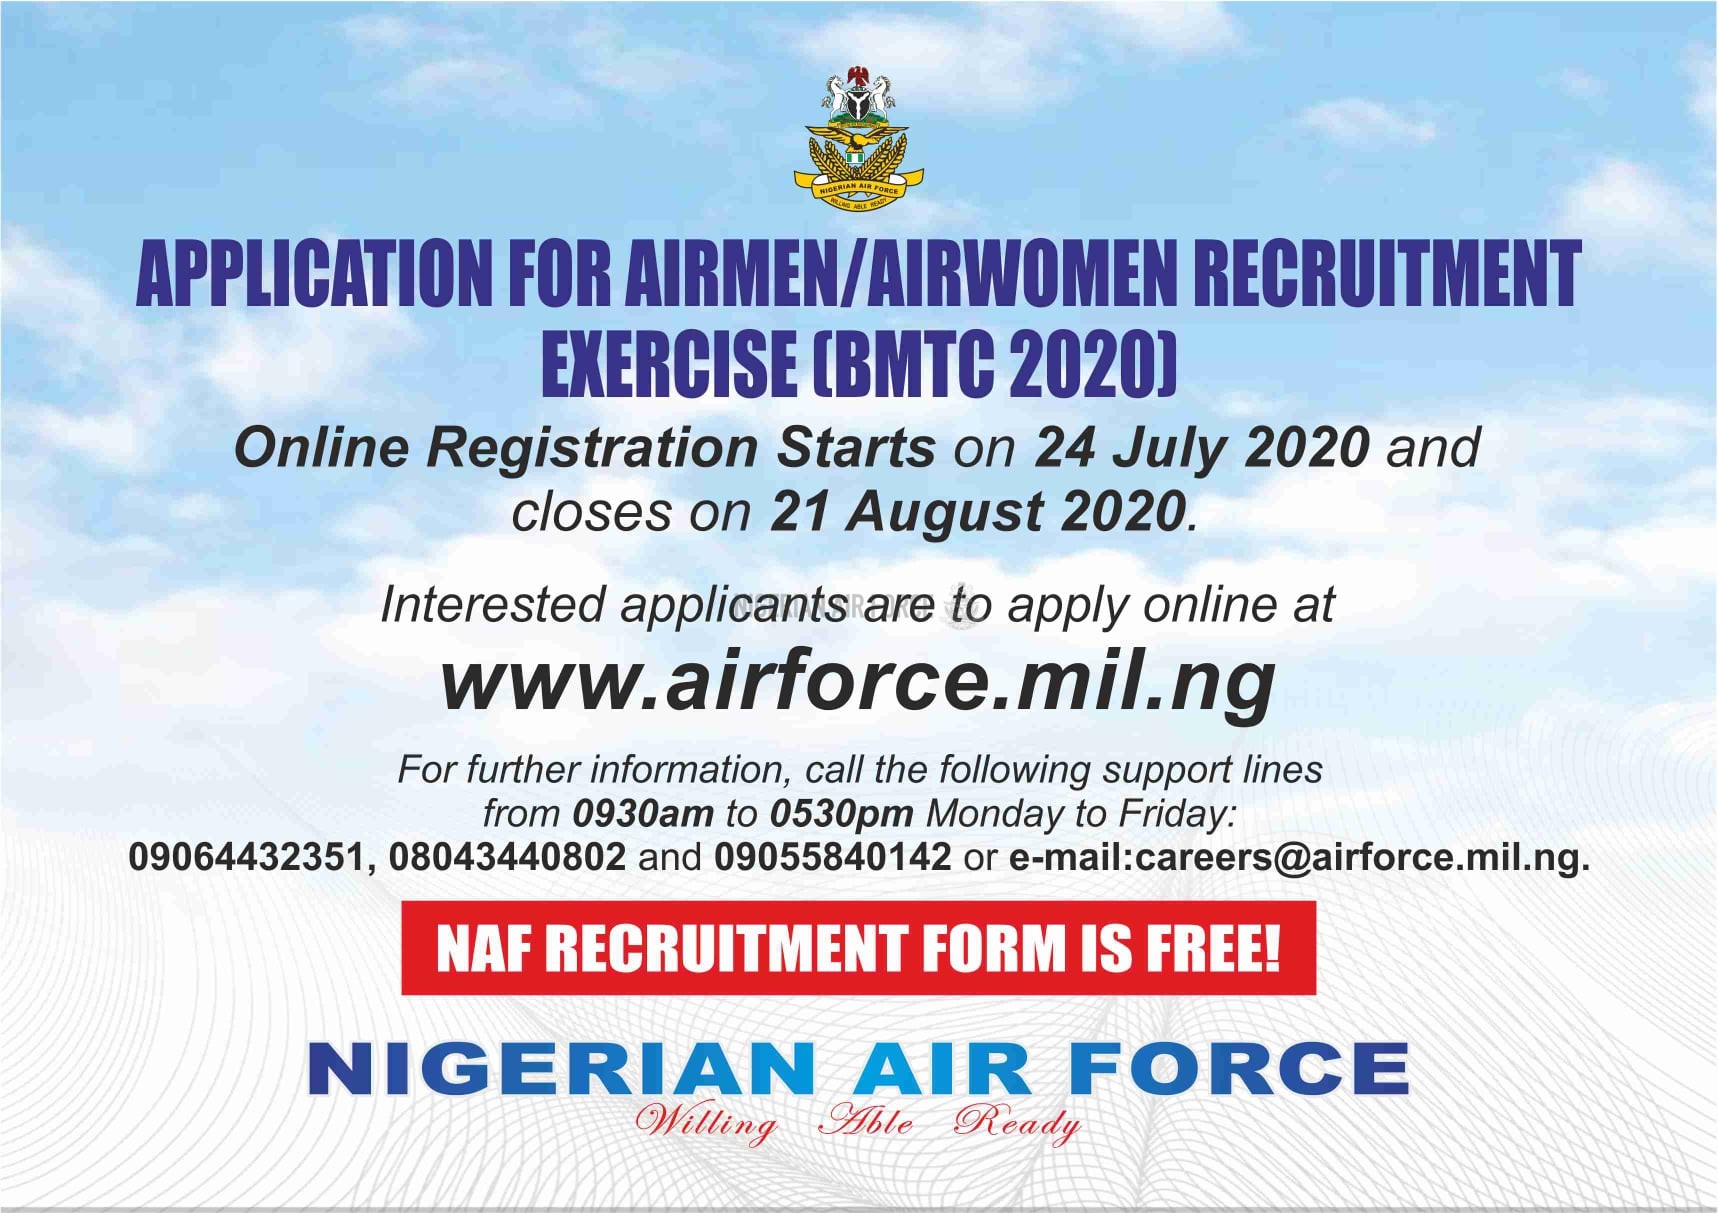 APPLICATION FOR AIRMEN, AIRWOMEN RECRUITMENT TO COMMENCE ONLINE ON  24 JULY 2020